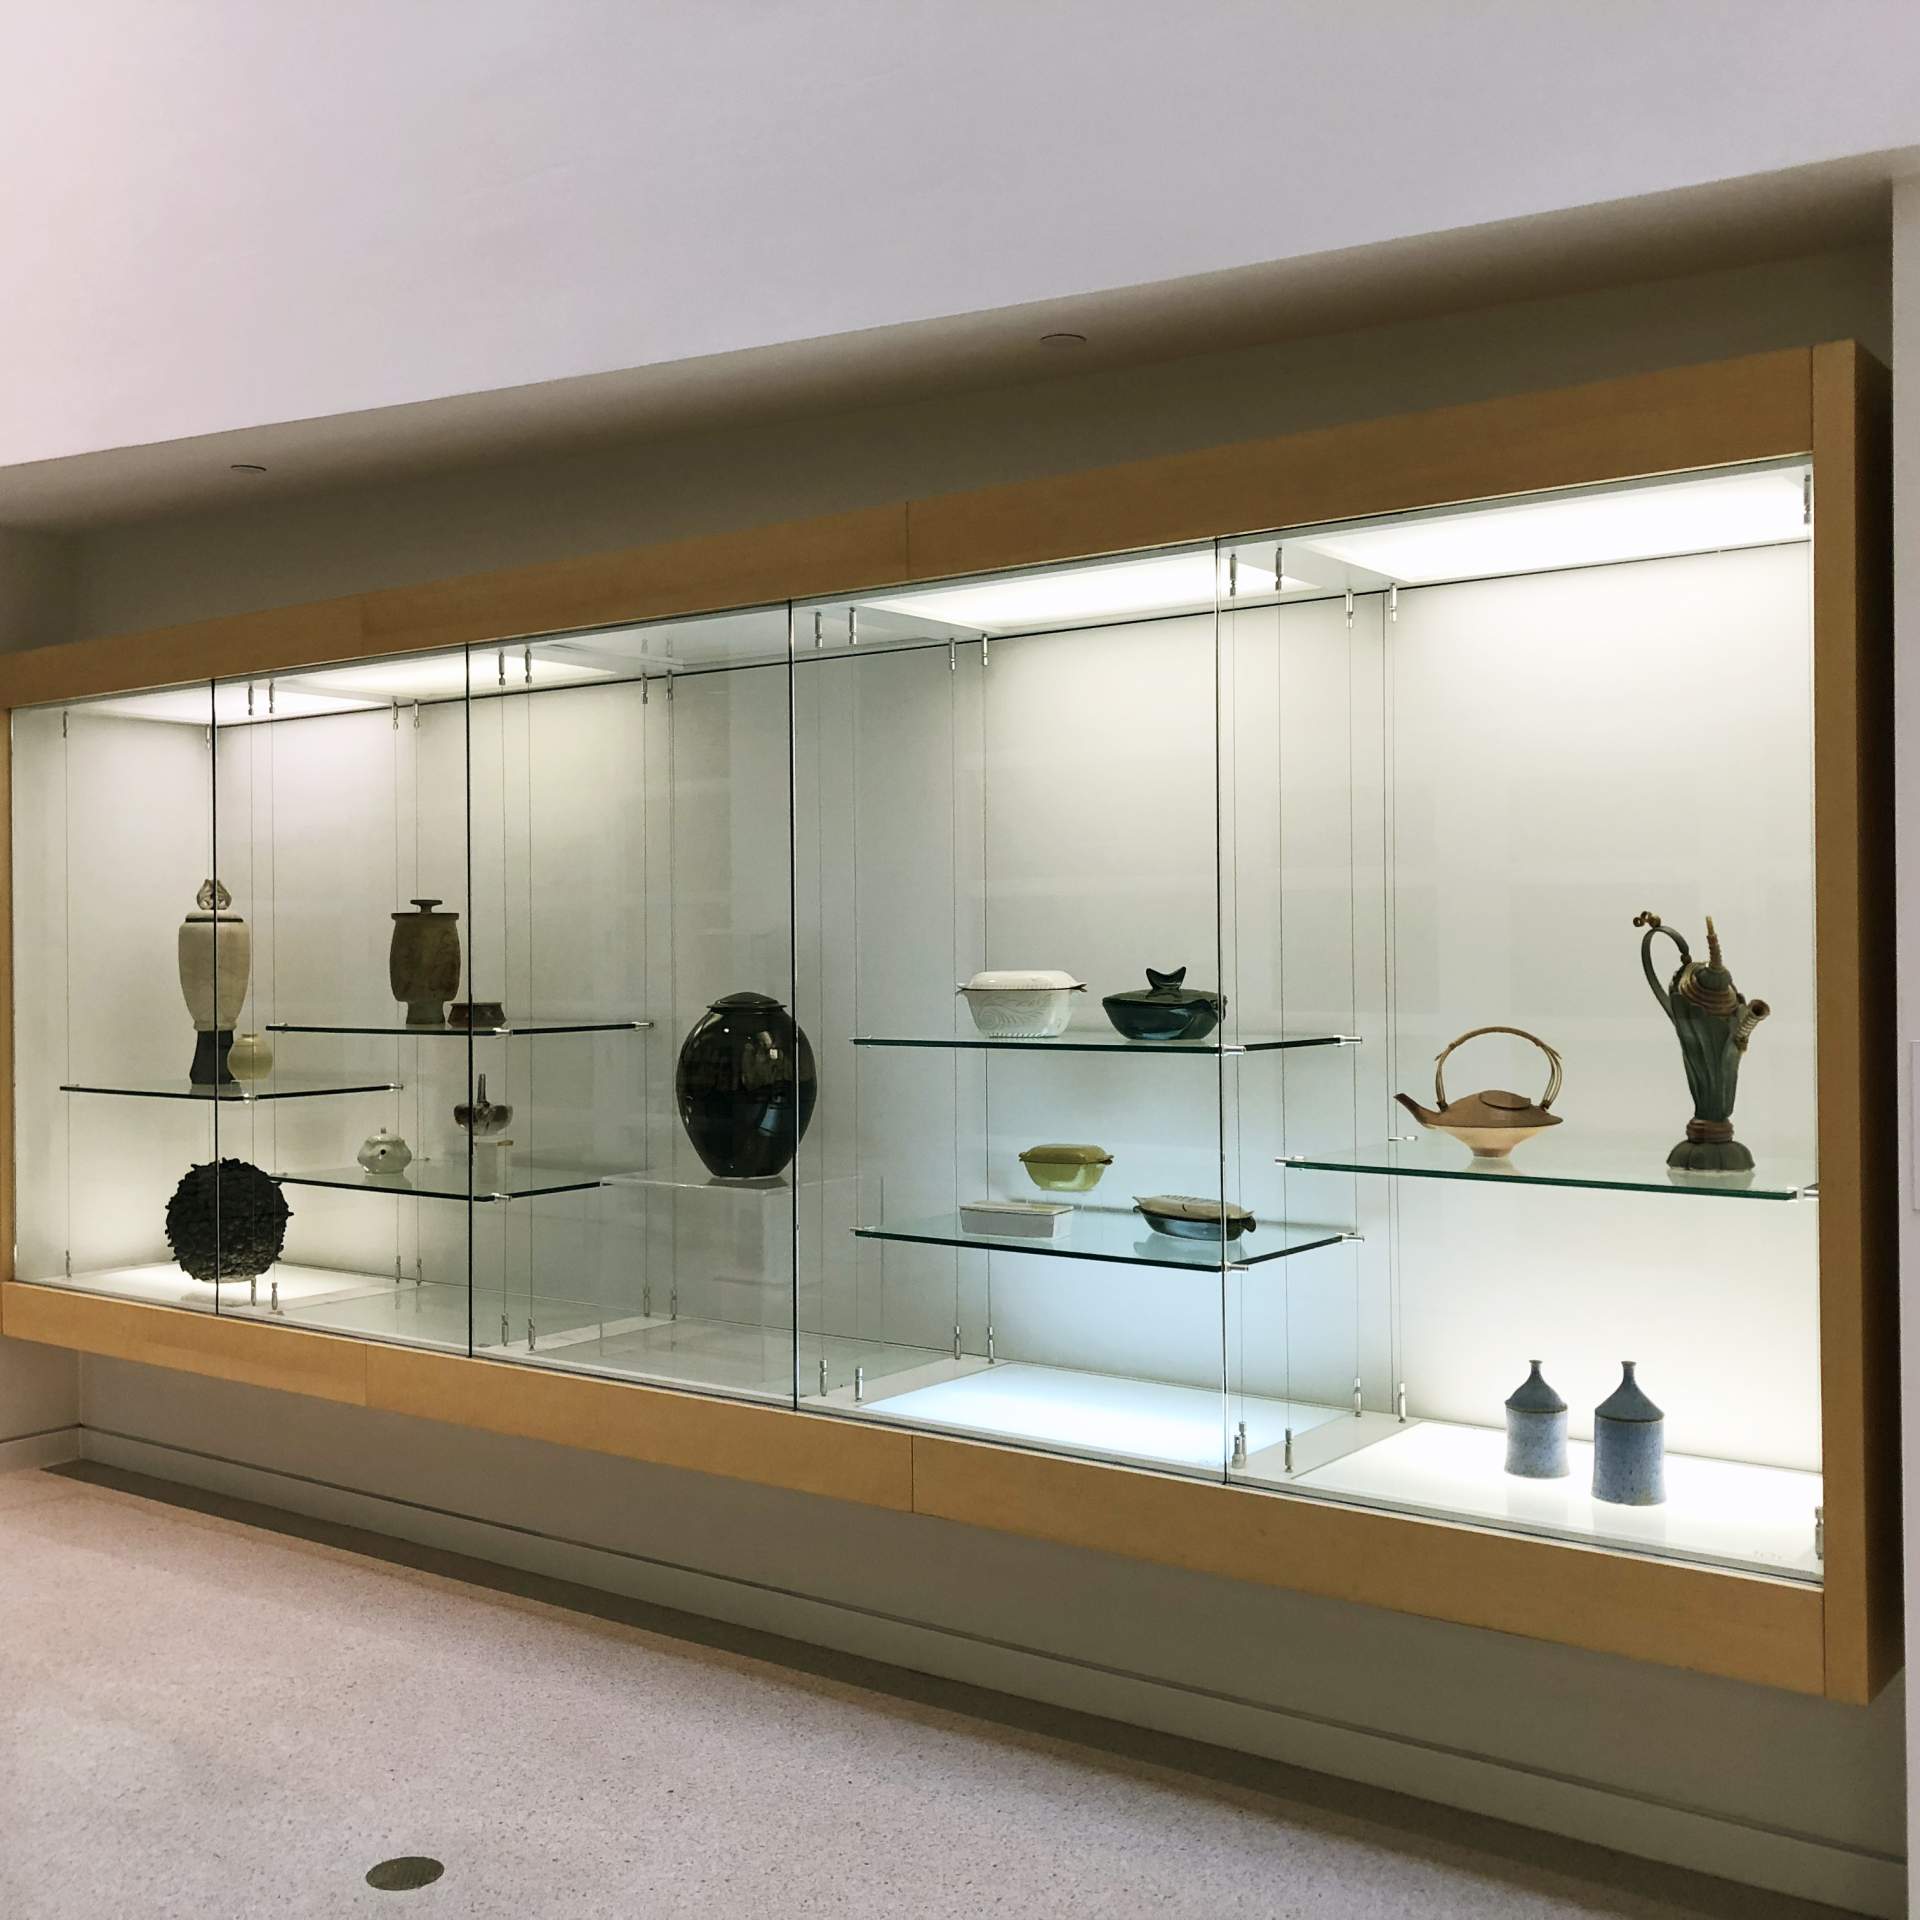 Under Cover: A selection of objects with lids from our permanent collection